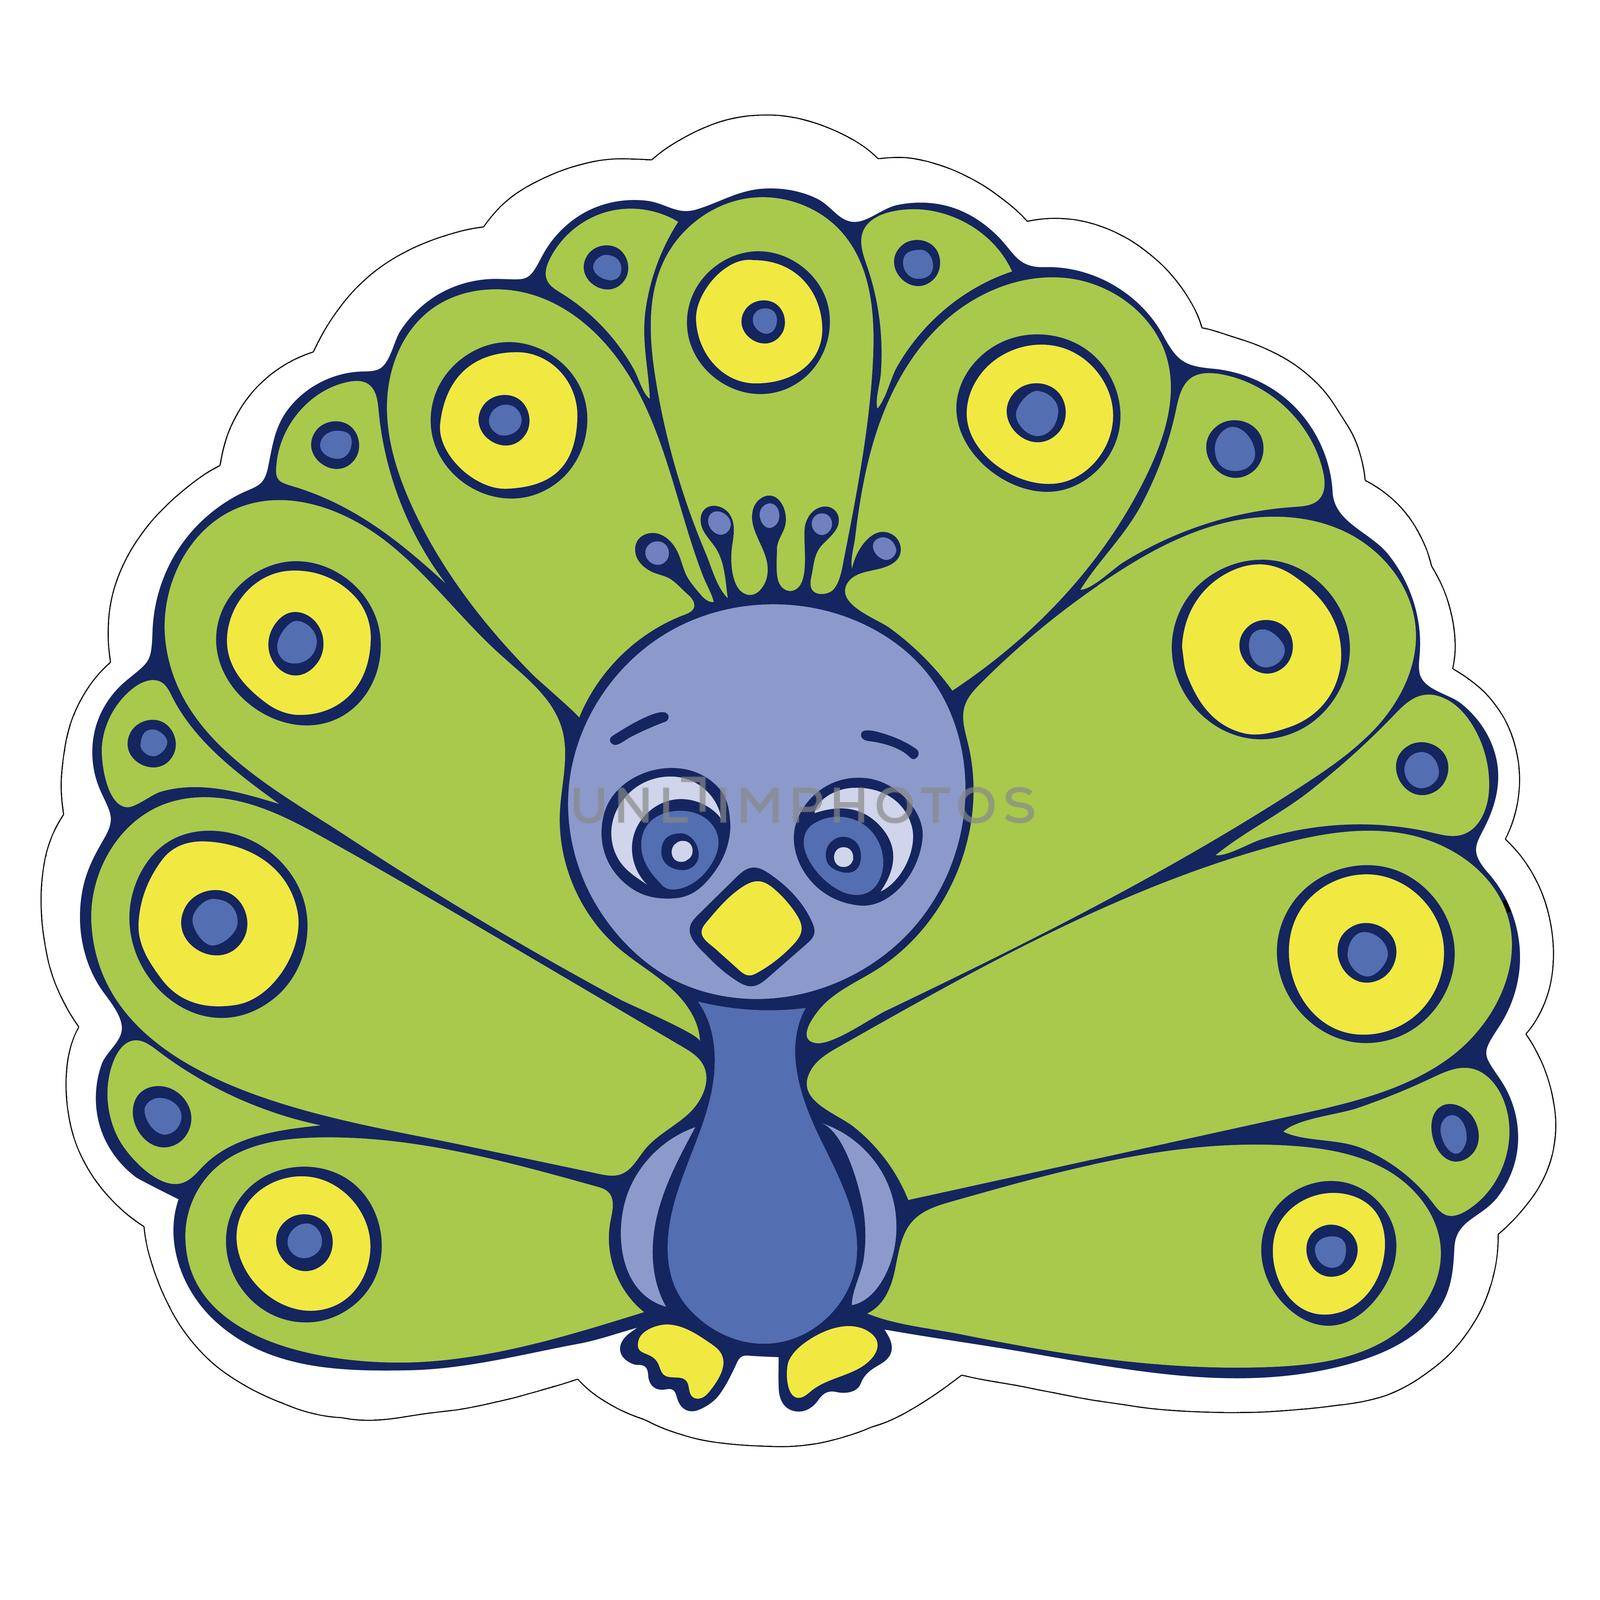 Hand-drawn Cute Peacock with Honey Sticker. Isolated Peacock on White Background.